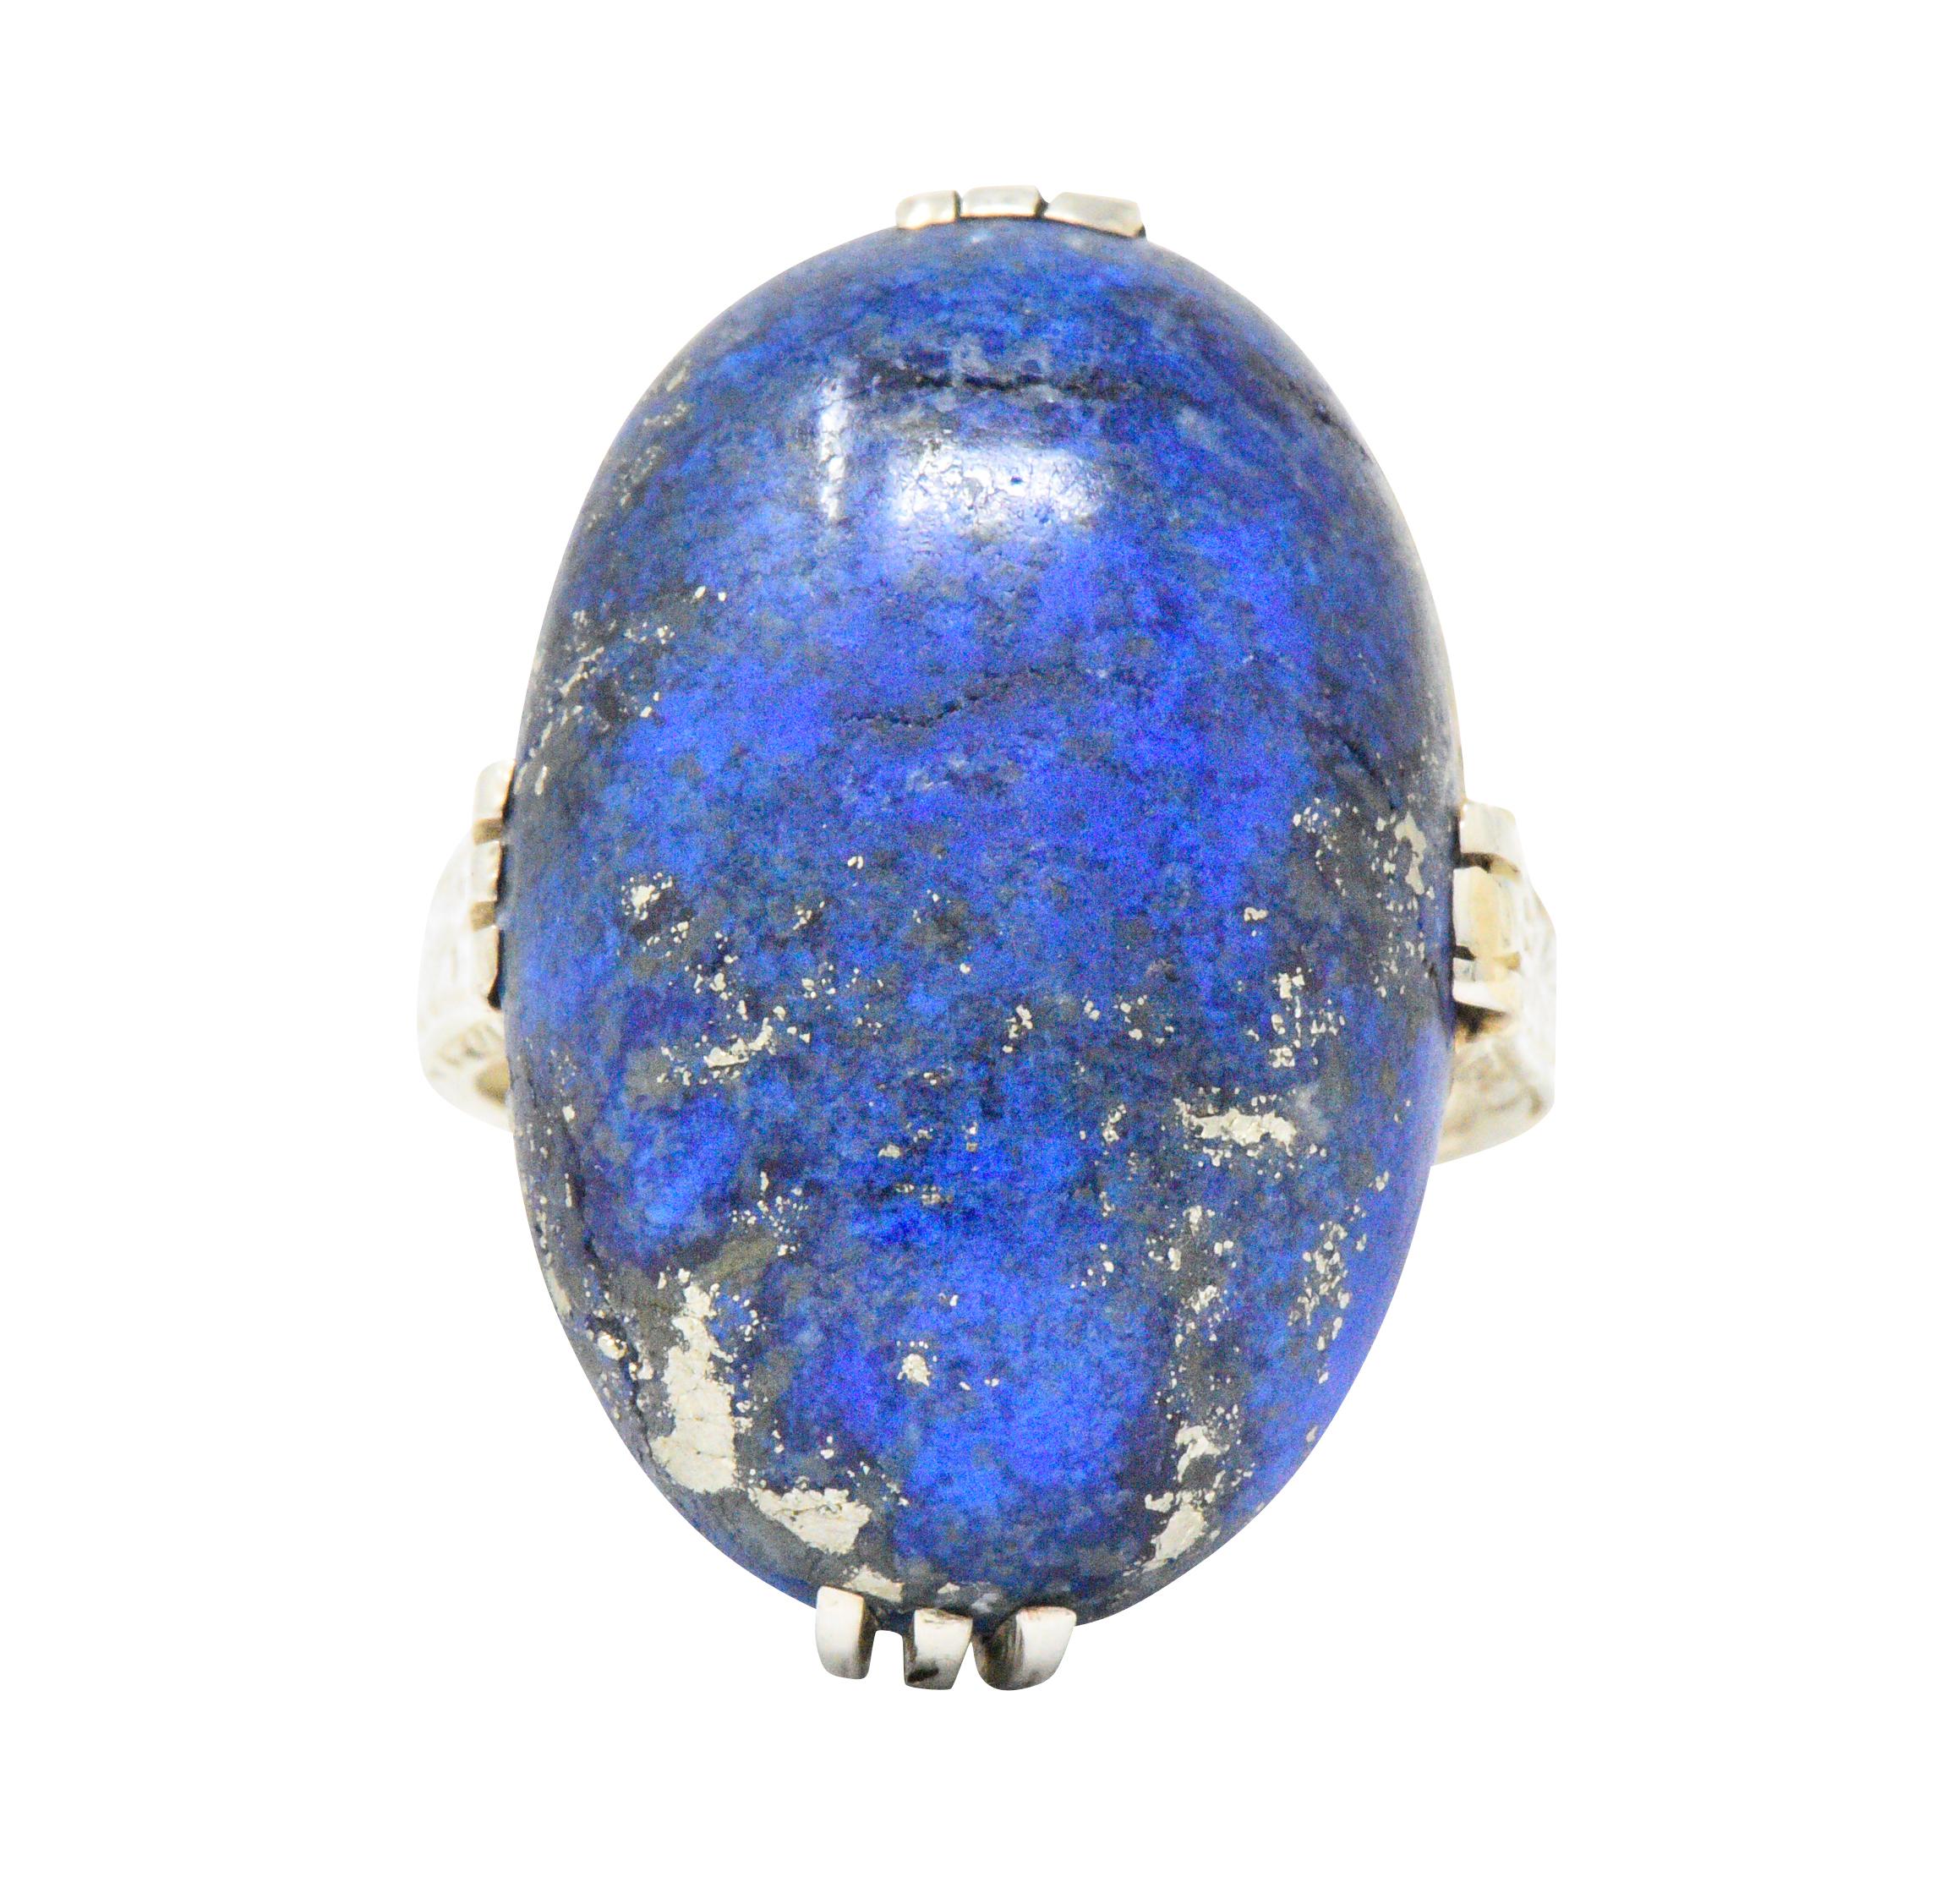 Centering an oval cabochon lapis lazuli measuring approximately 23.0 x 15.0 x 6.0 mm

Bright deep blue with flecks of pyrite

North, east, south, west trip-split prong setting with lovely engraving detail around and part-way down the shank

Fun bold